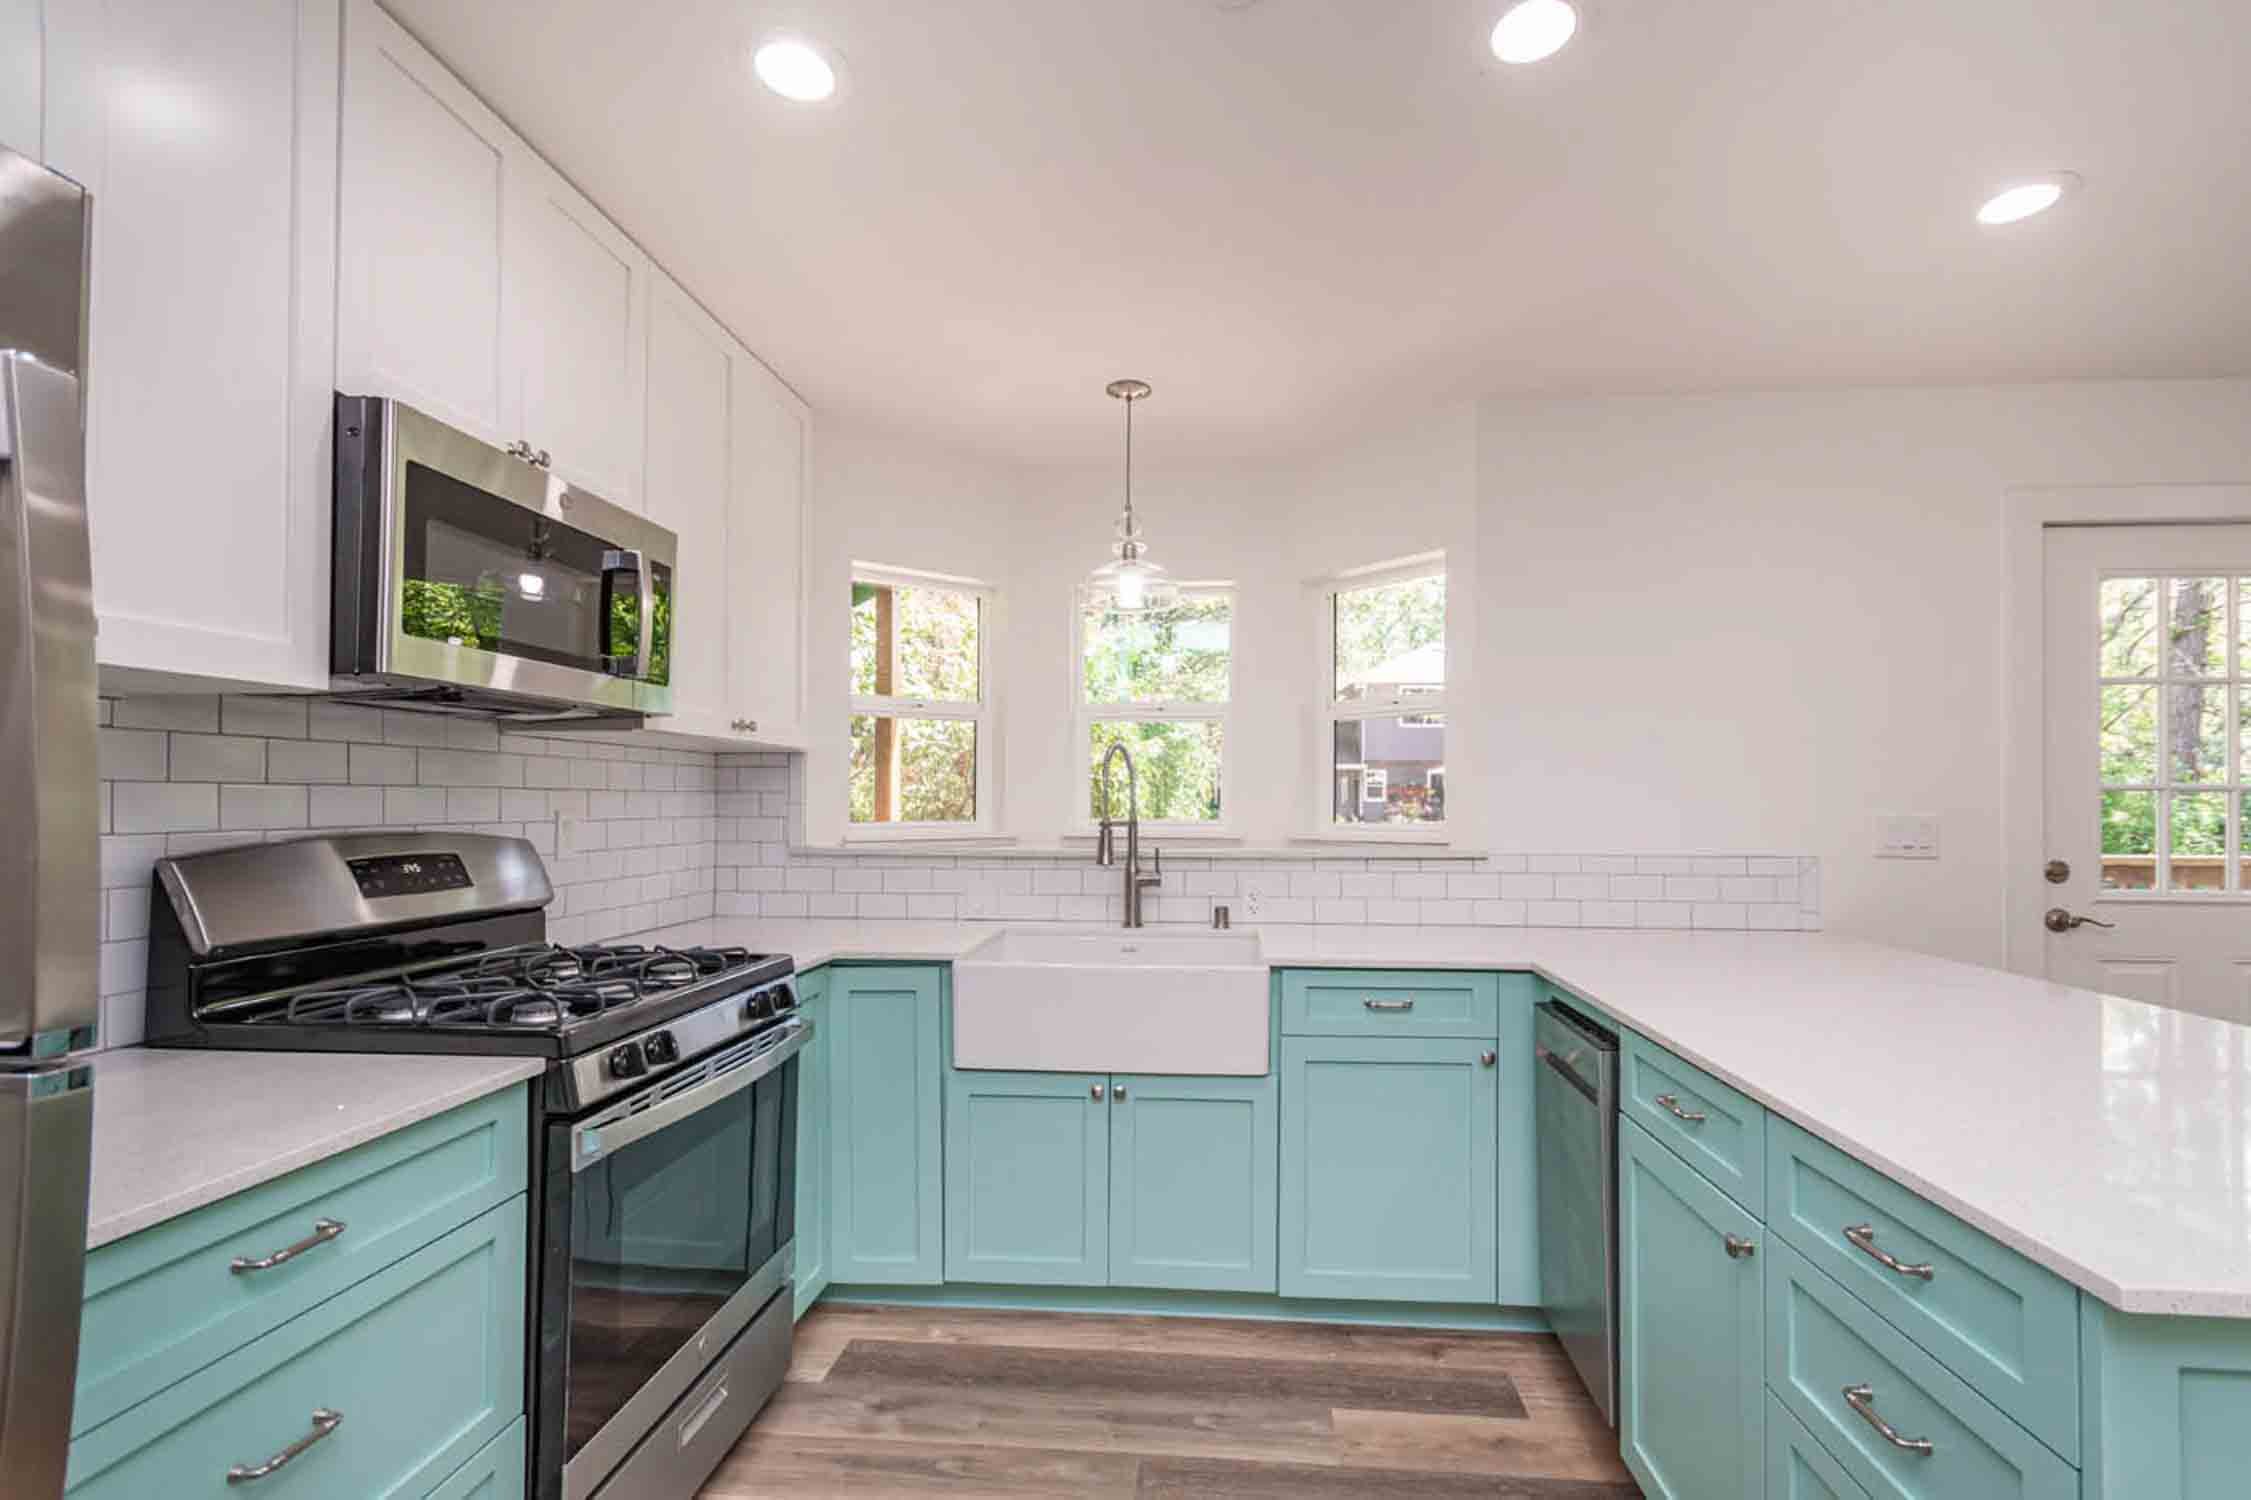 East Bay tiny house companies and their project of a mint green kitchen in a home.